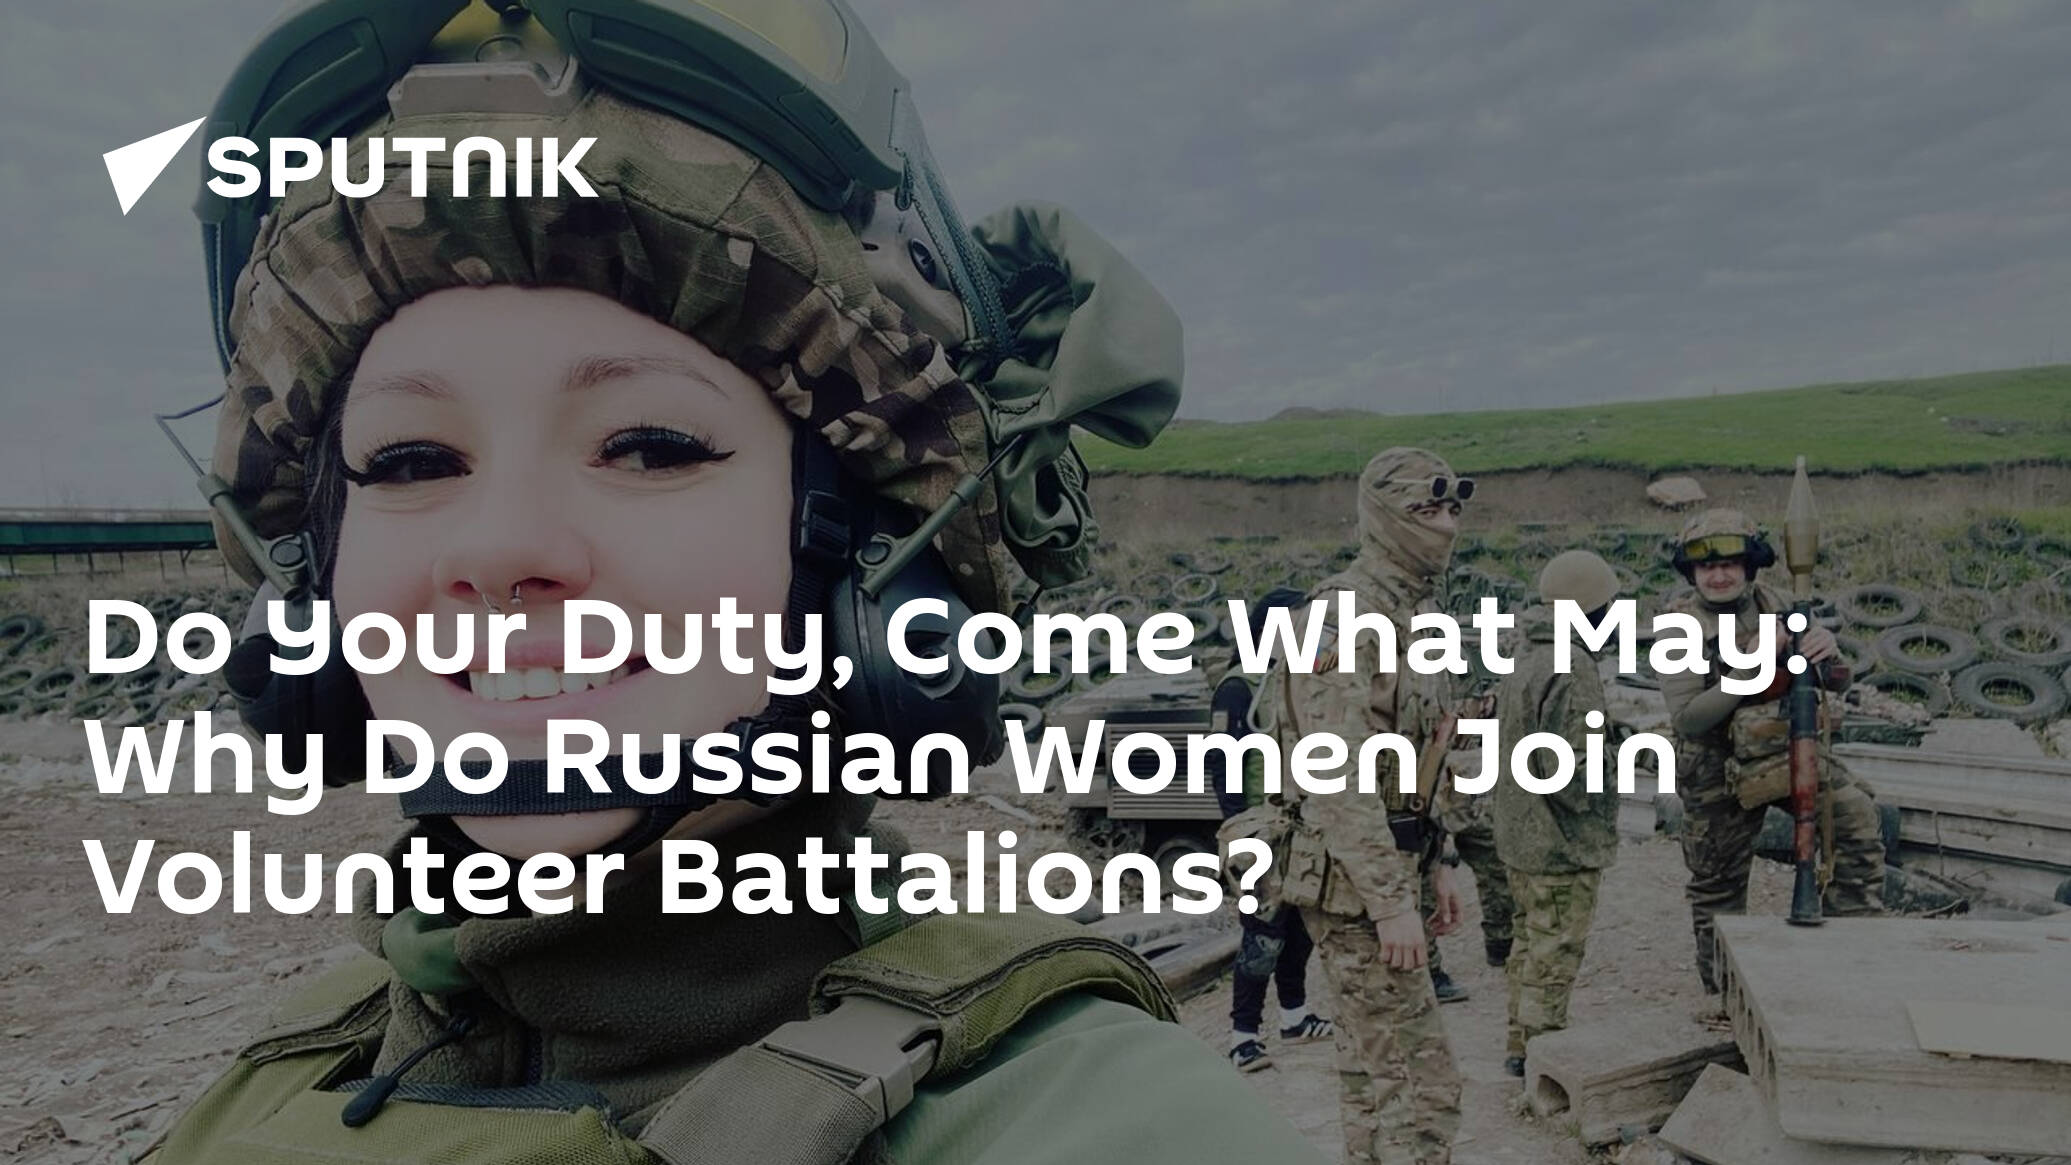 Do Your Duty, Come What May: Why Do Russian Women Join Volunteer Battalions?